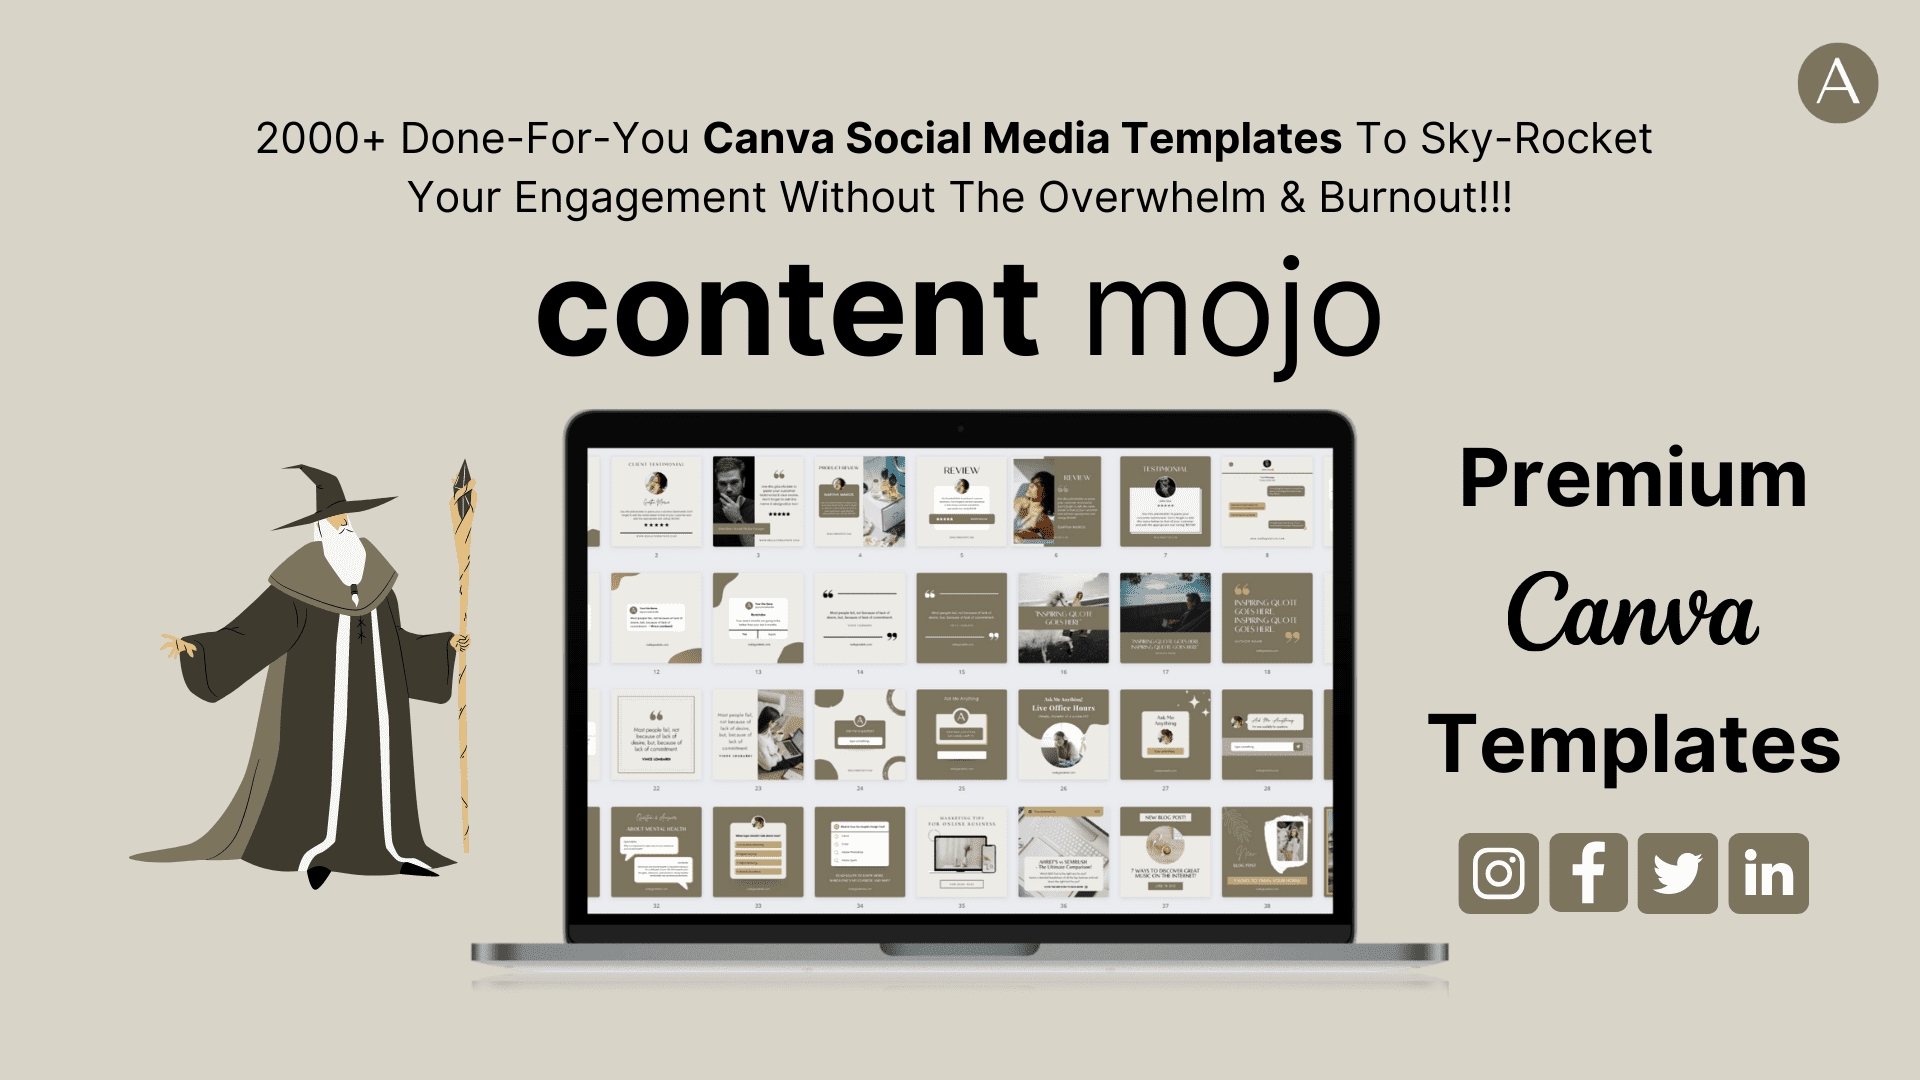 content mojo - what to post on social media